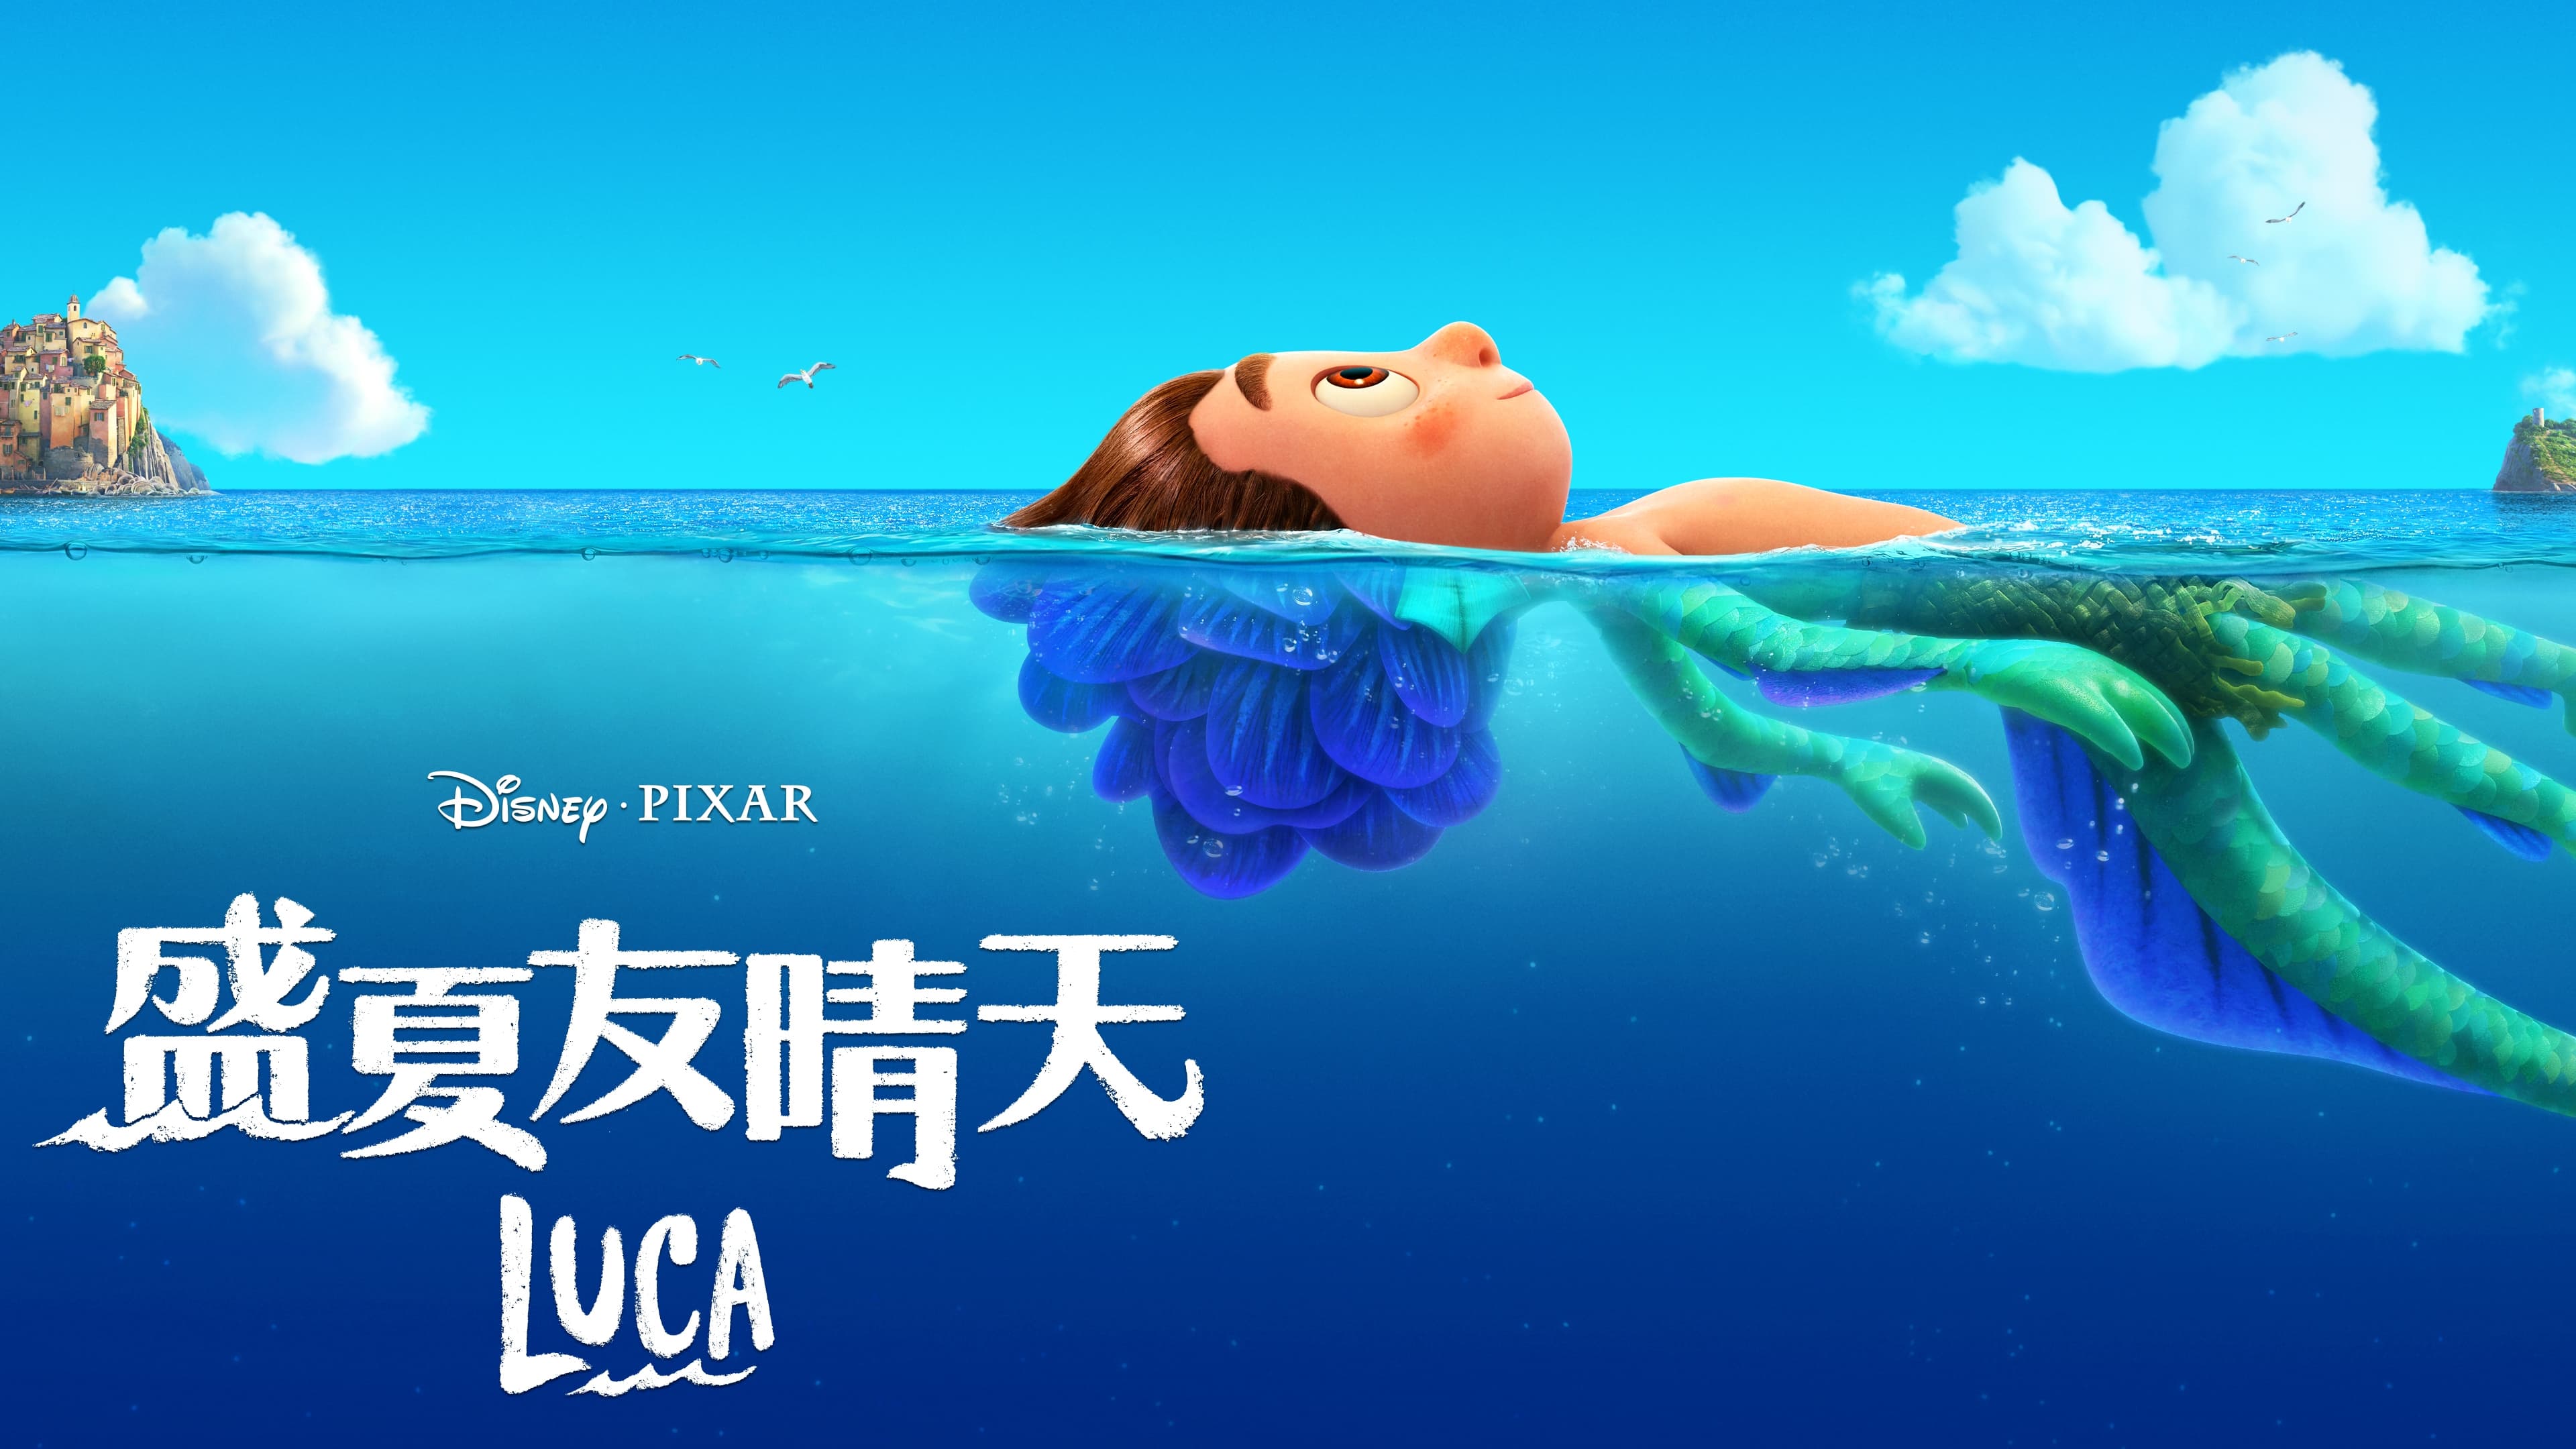 Watch Luca (2021) Full Movie Online Free Stream Movies & TV Shows.